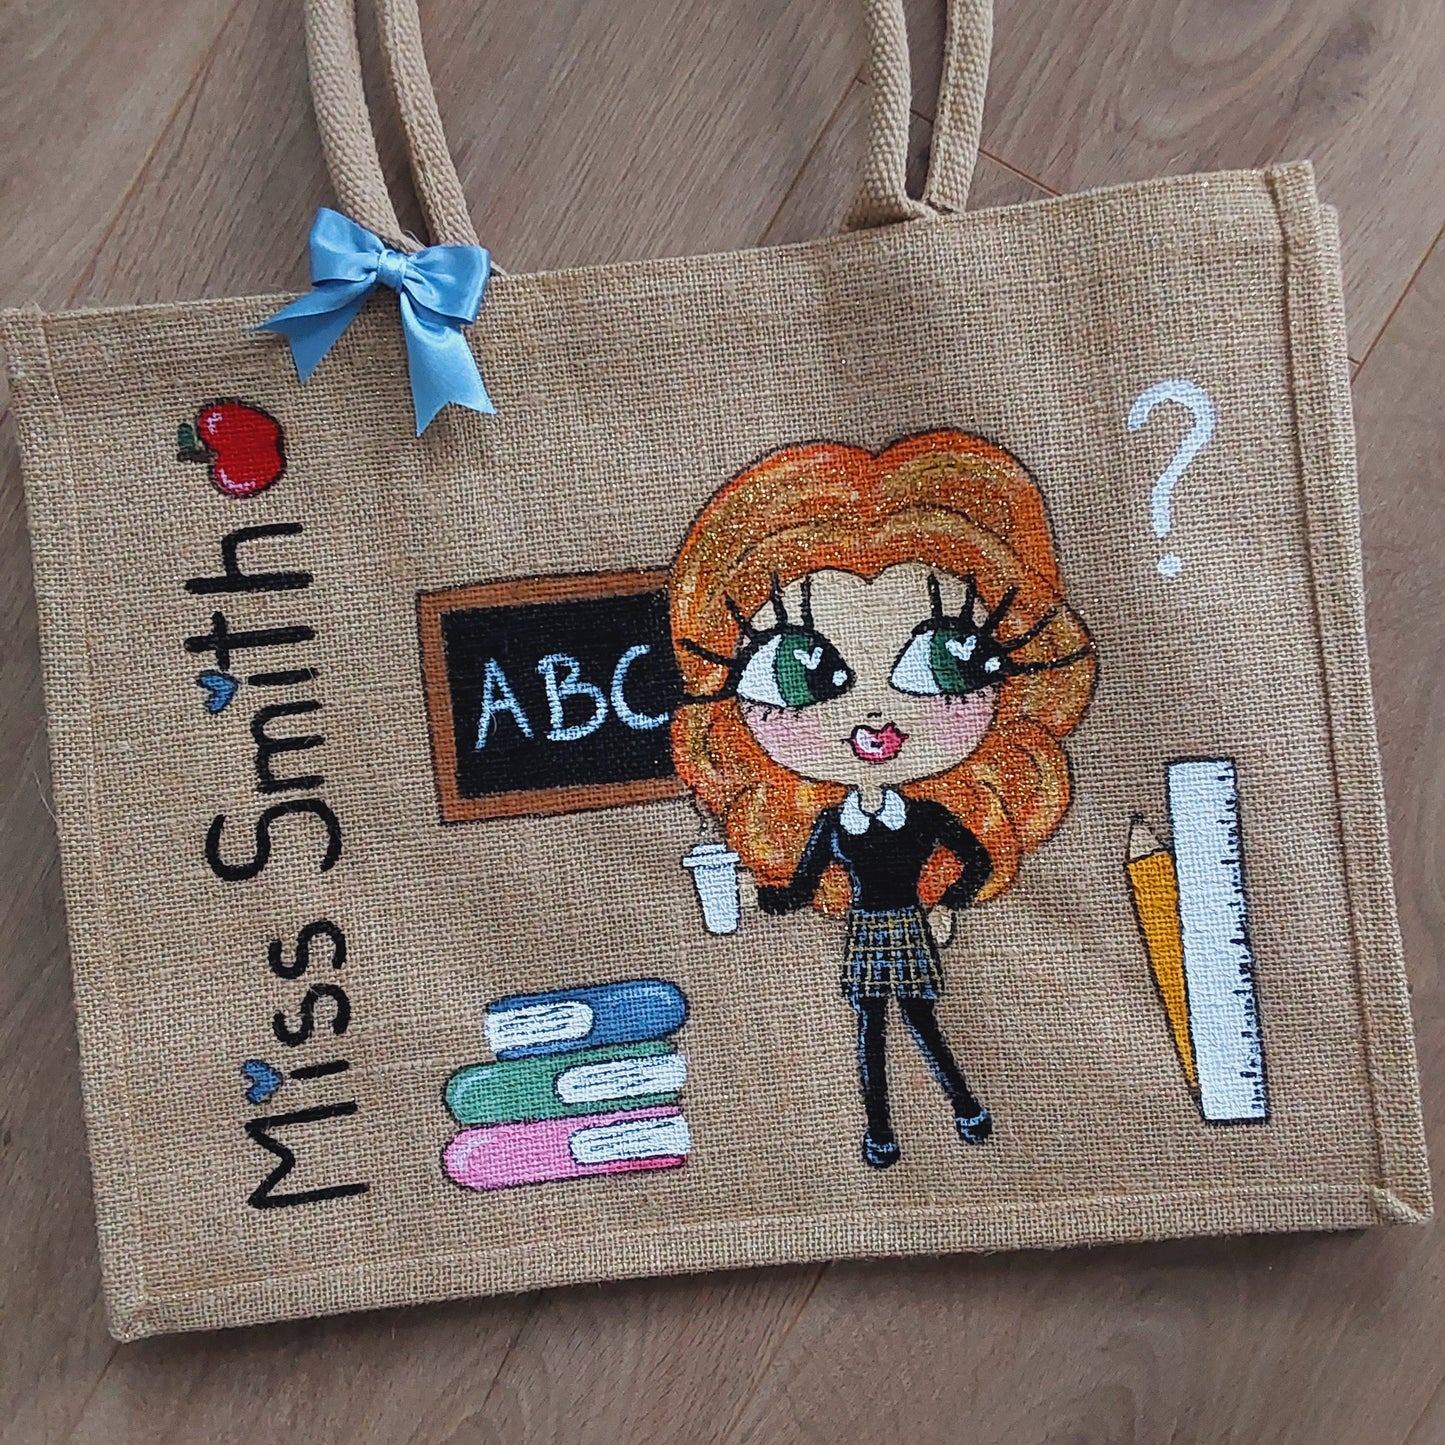 Personalised hand painted character jute bag perfect end of term gift for teacher